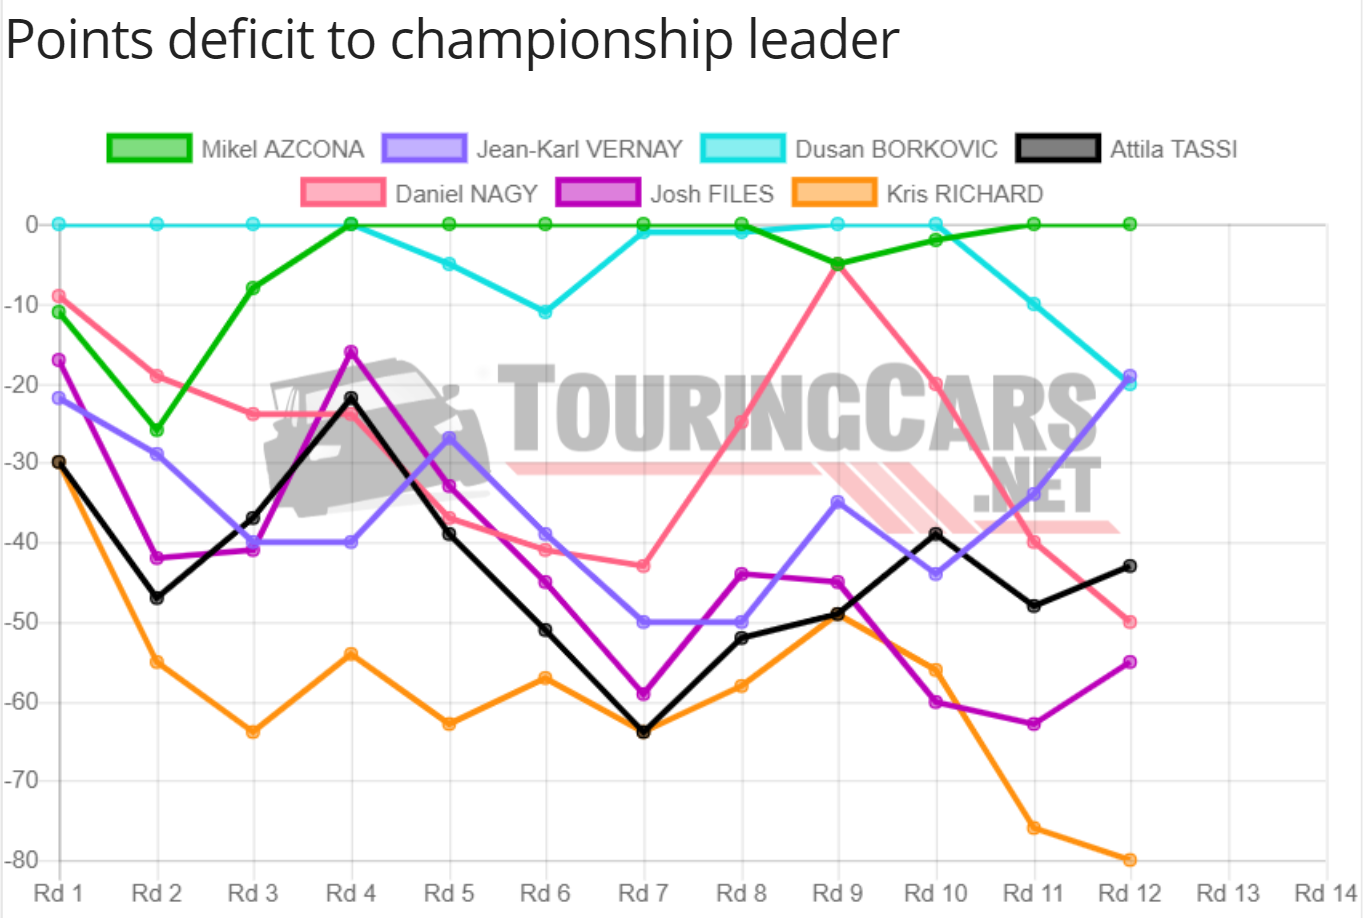 TCR Europe points deficit chart